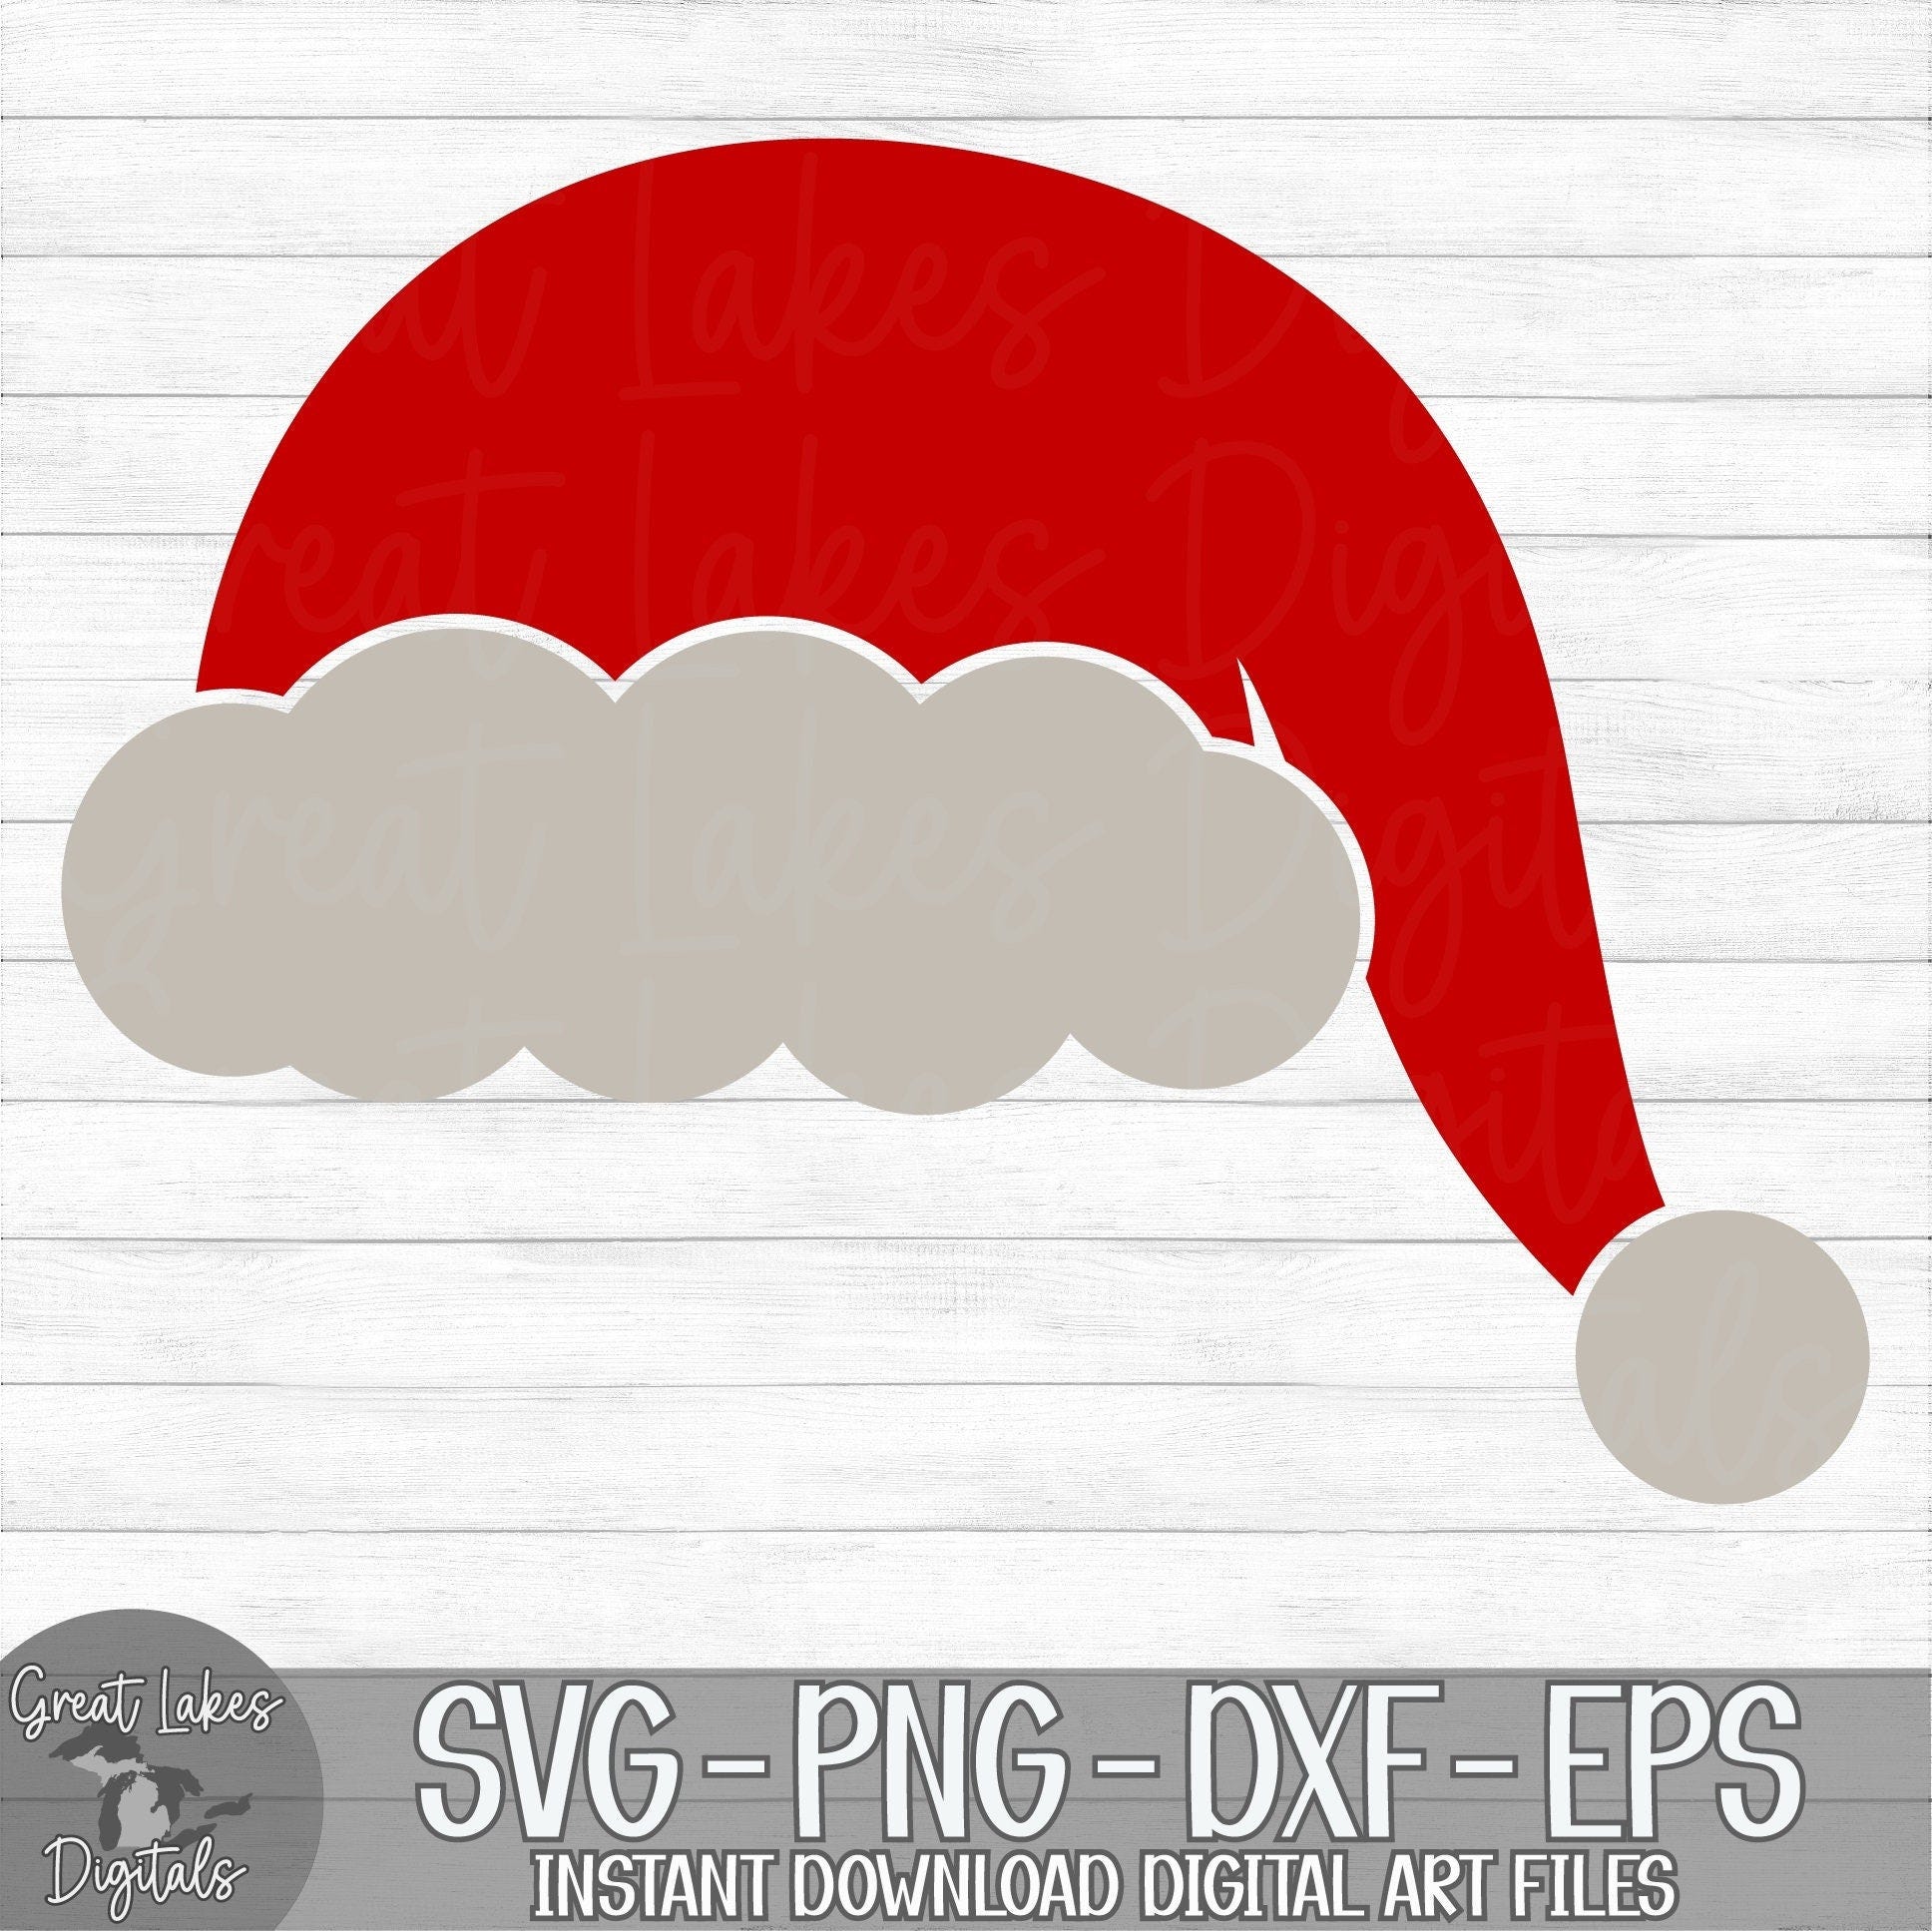 Santa Hat - Instant Digital Download - svg, png, dxf, and eps files included! Christmas, Santa Clause, Santa